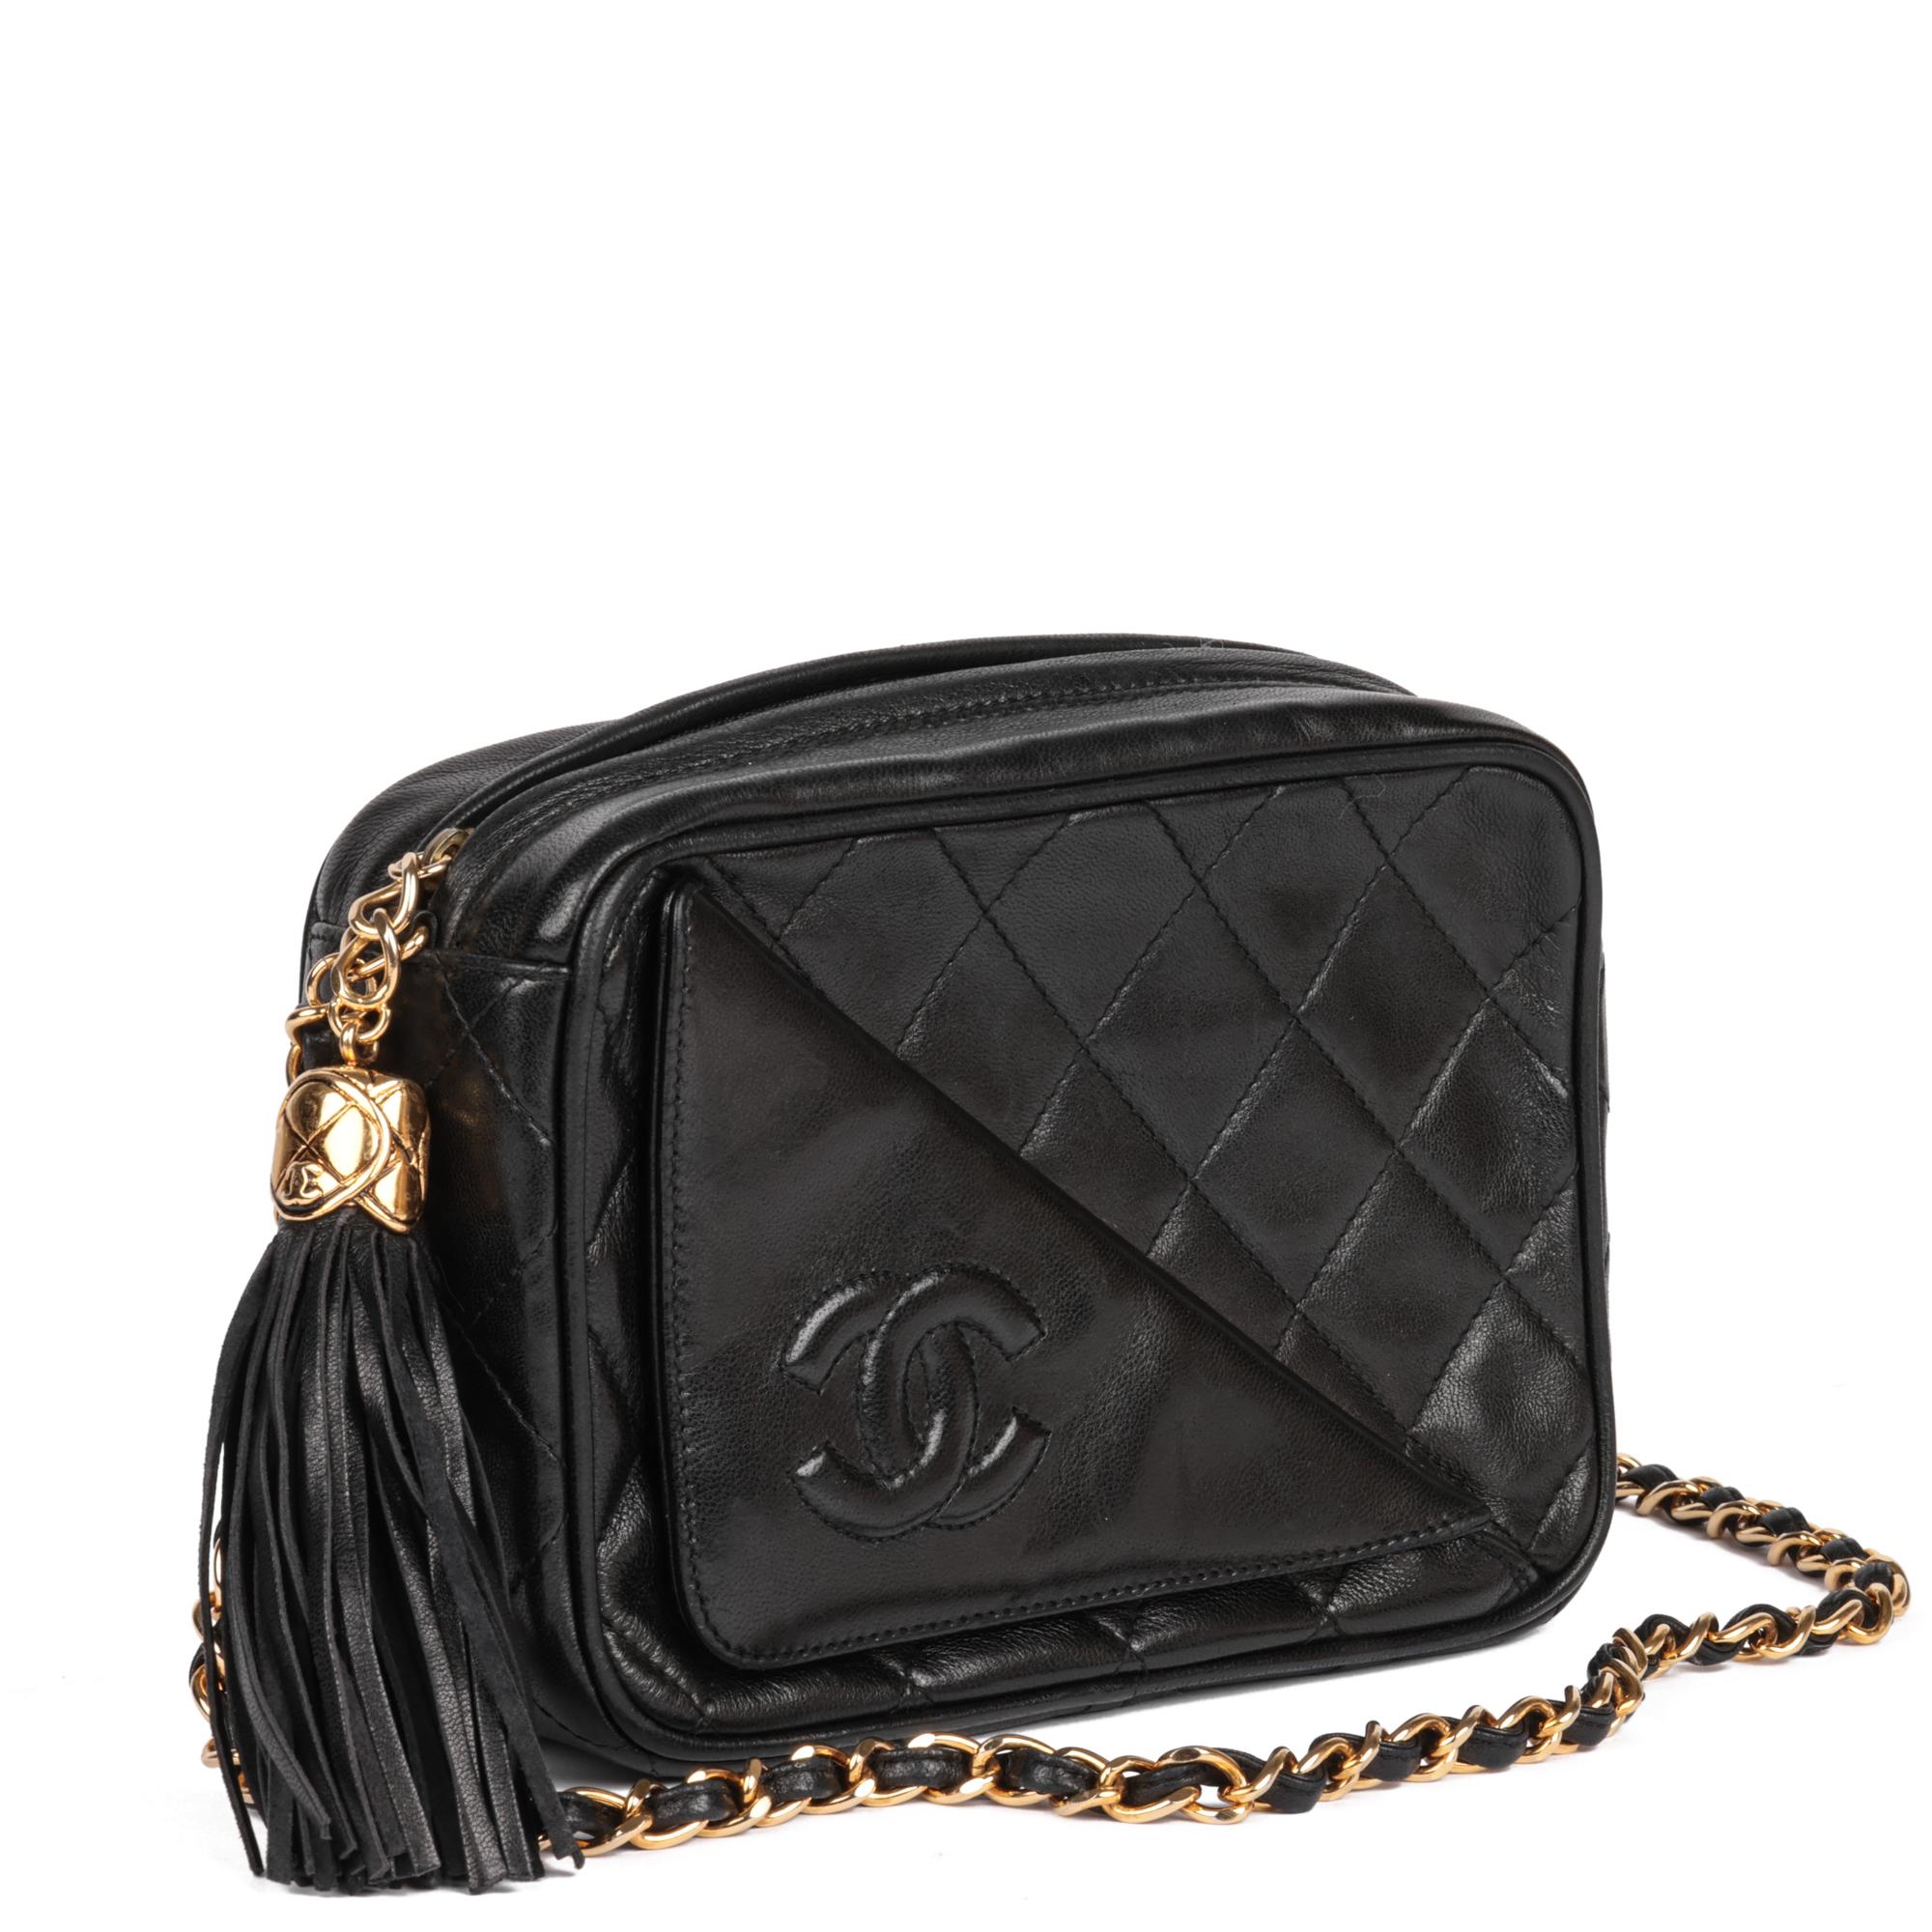 CHANEL
Black Quilted Lambskin Vintage Mini Fringe Timeless Camera Bag

Xupes Reference: HB5237
Serial Number: 1548928
Age (Circa): 1990
Accompanied By: Chanel Dust Bag, Authenticity Card
Authenticity Details: Authenticity Card, Serial Sticker (Made